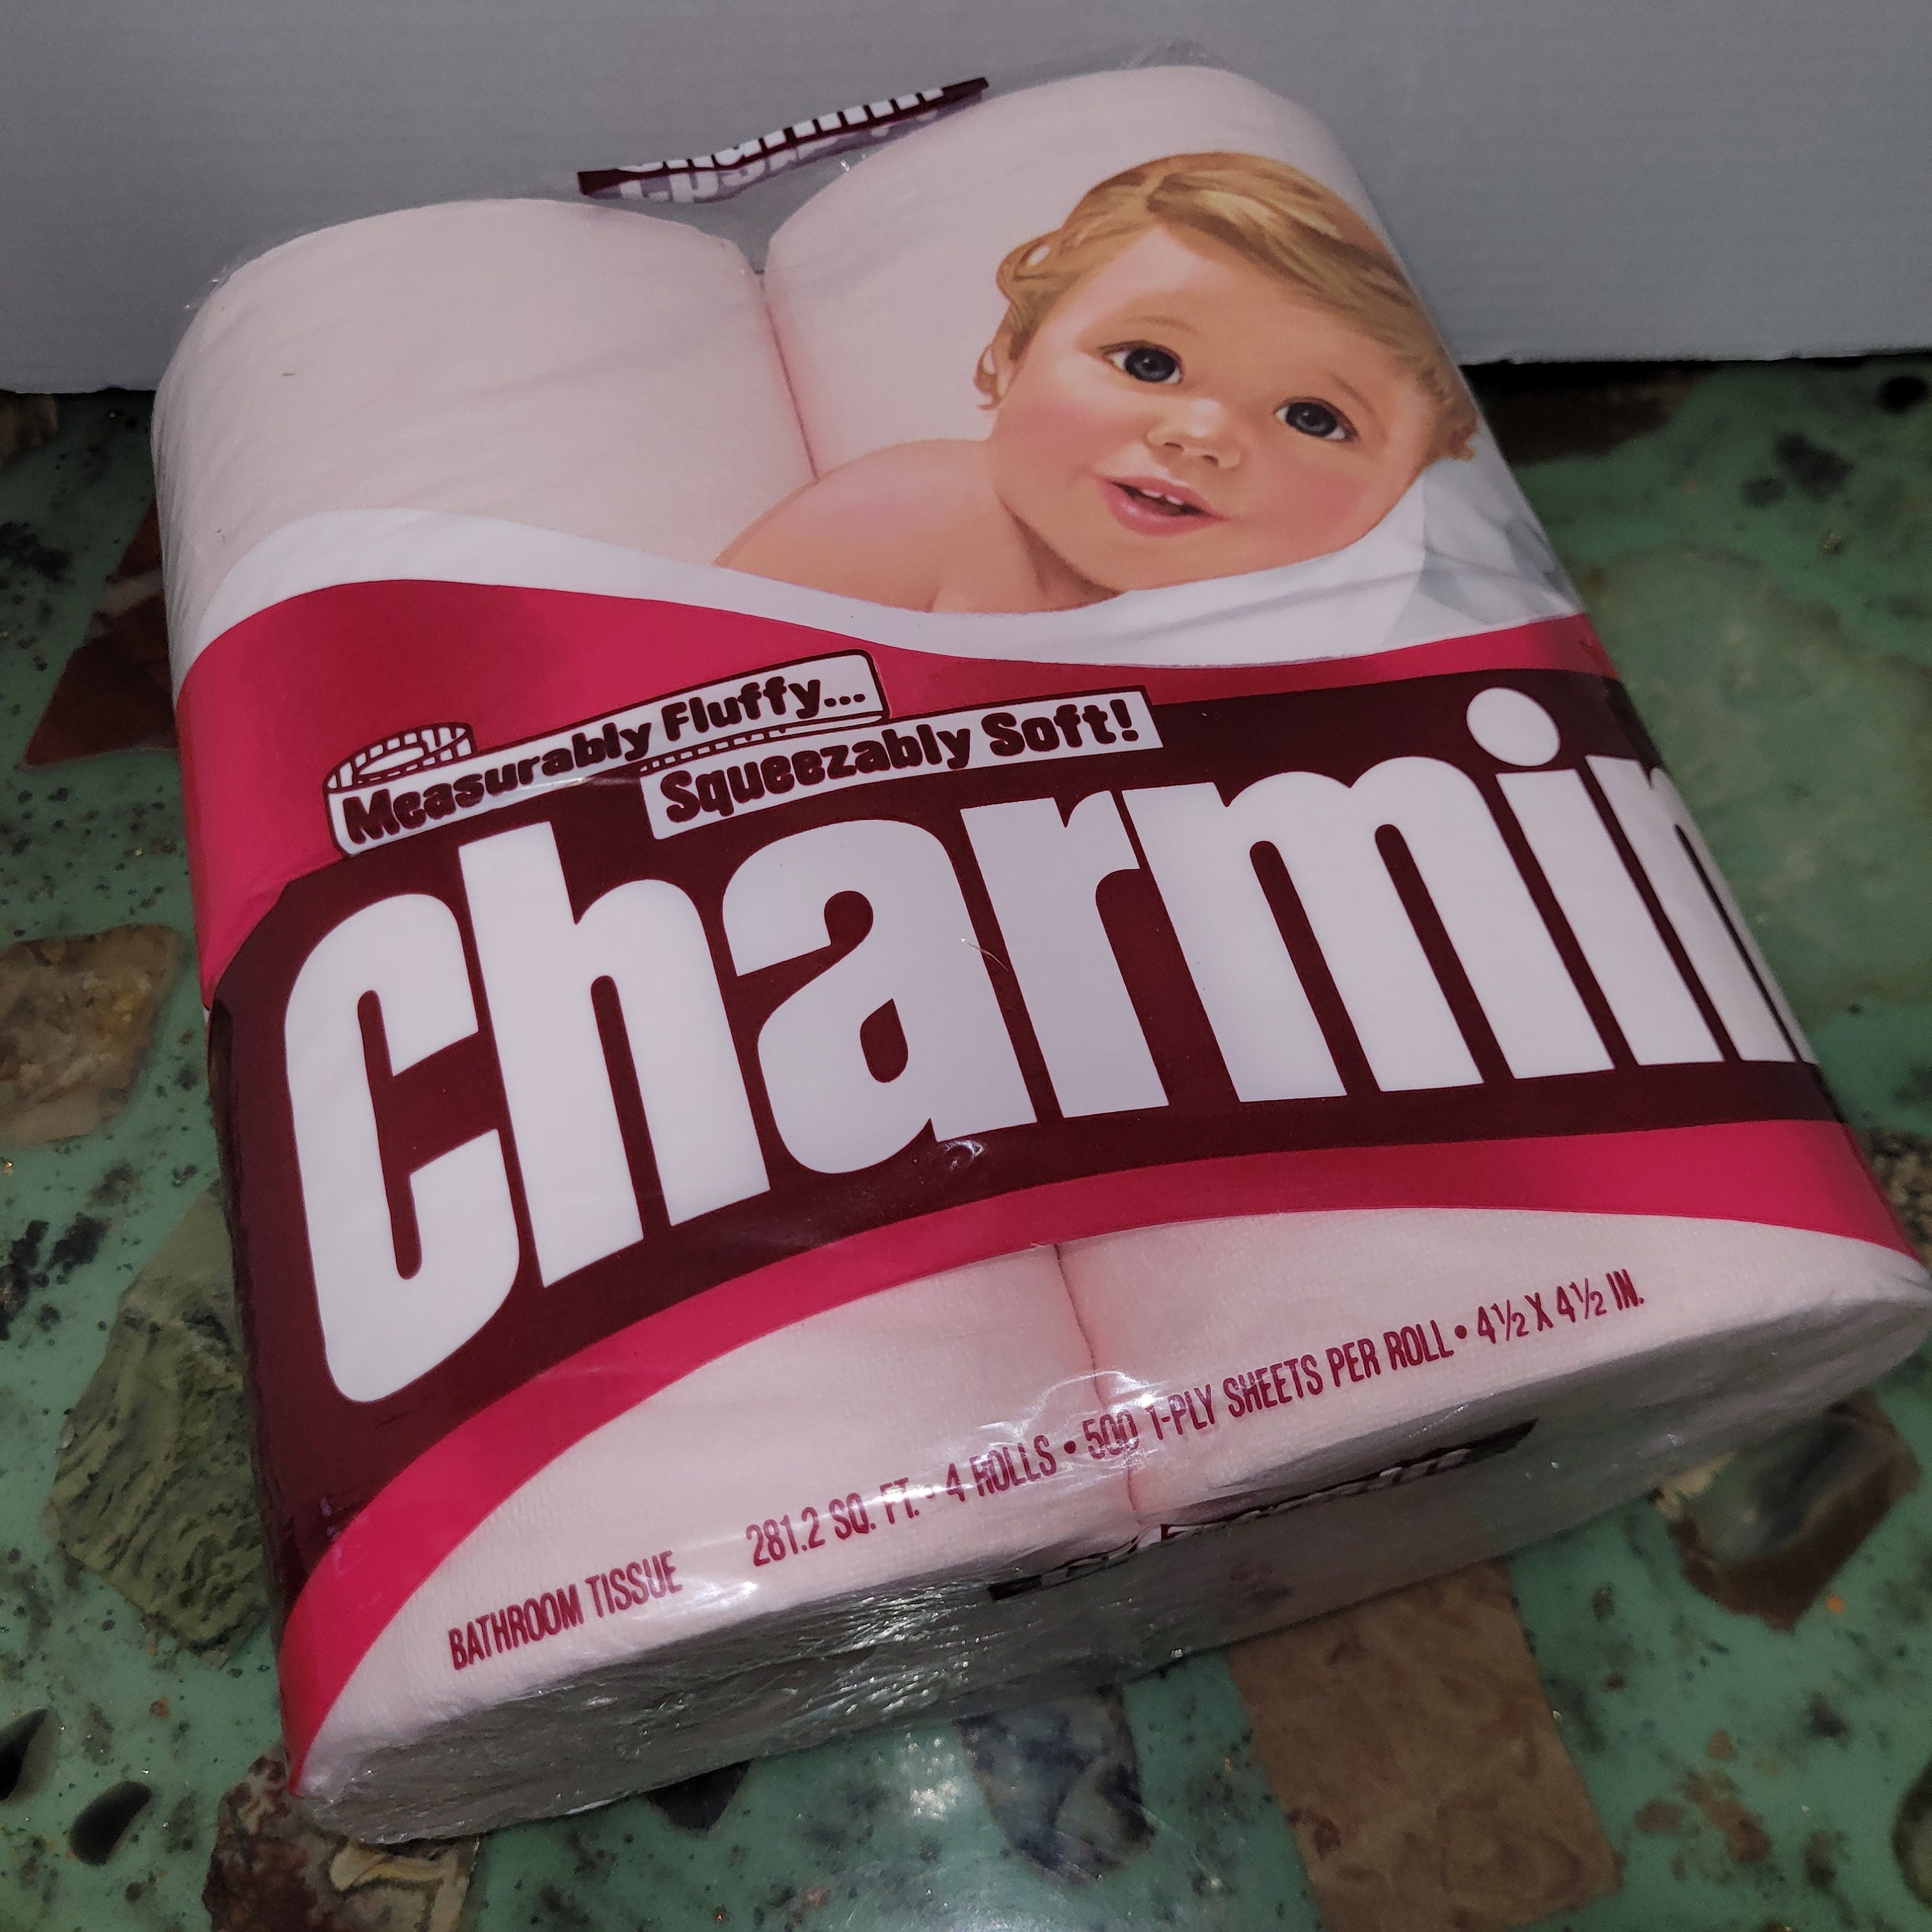 Charmin Vintage Four Roll Green Colored Toilet Tissue Paper